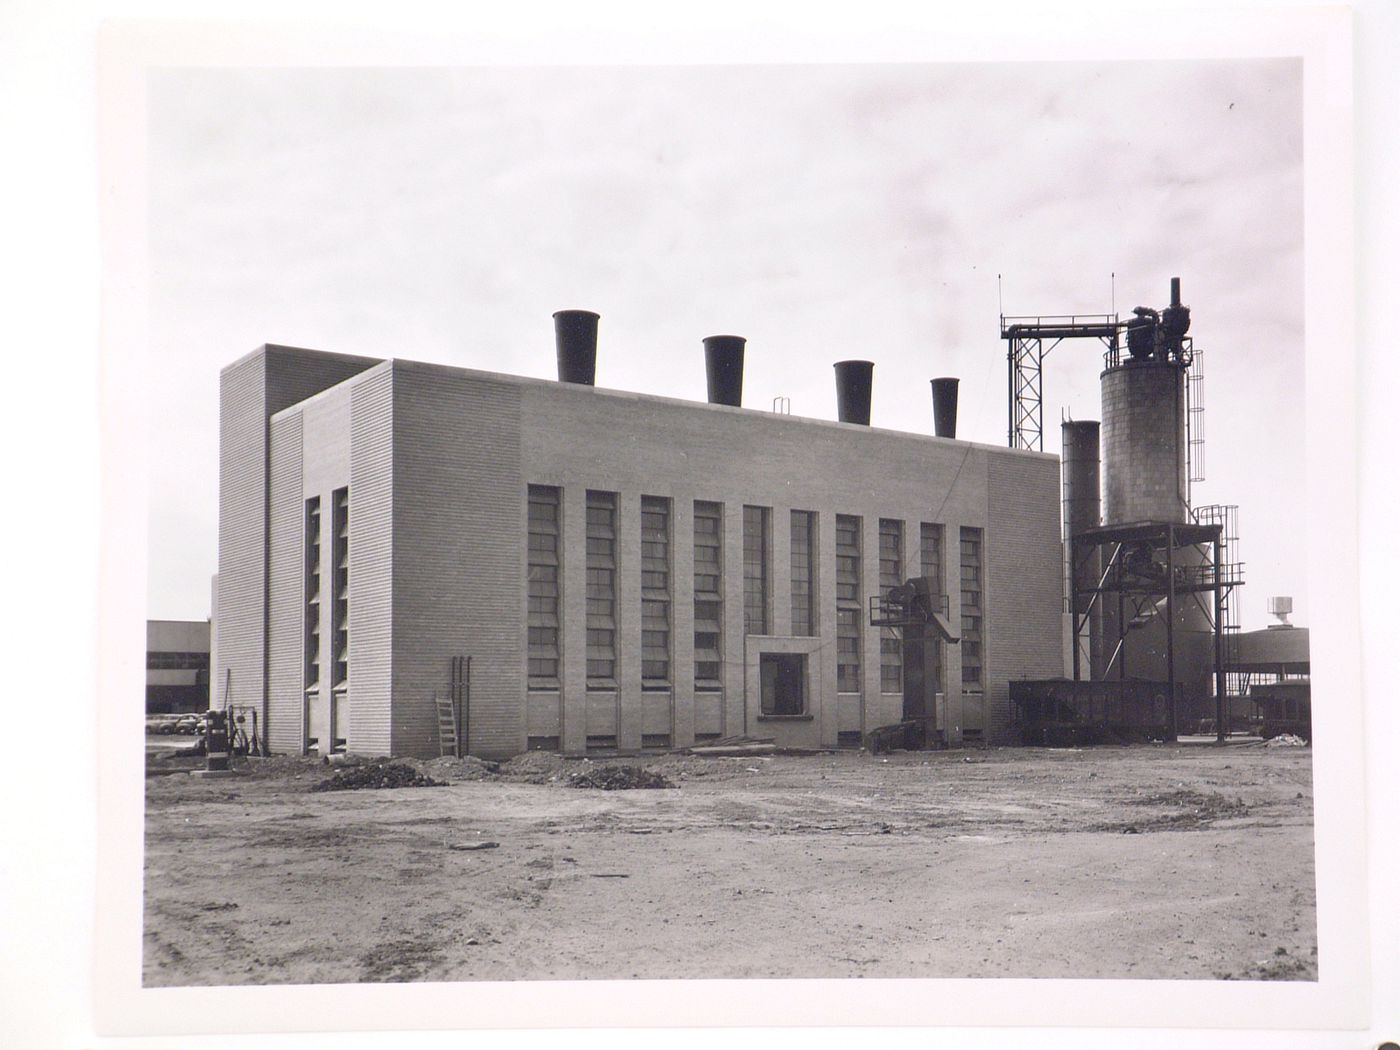 View of the principal and lateral façades of the Boiler House of the Buffalo Airport Assembly Plant, Curtiss-Wright Corporation Airplane division, Buffalo, New York